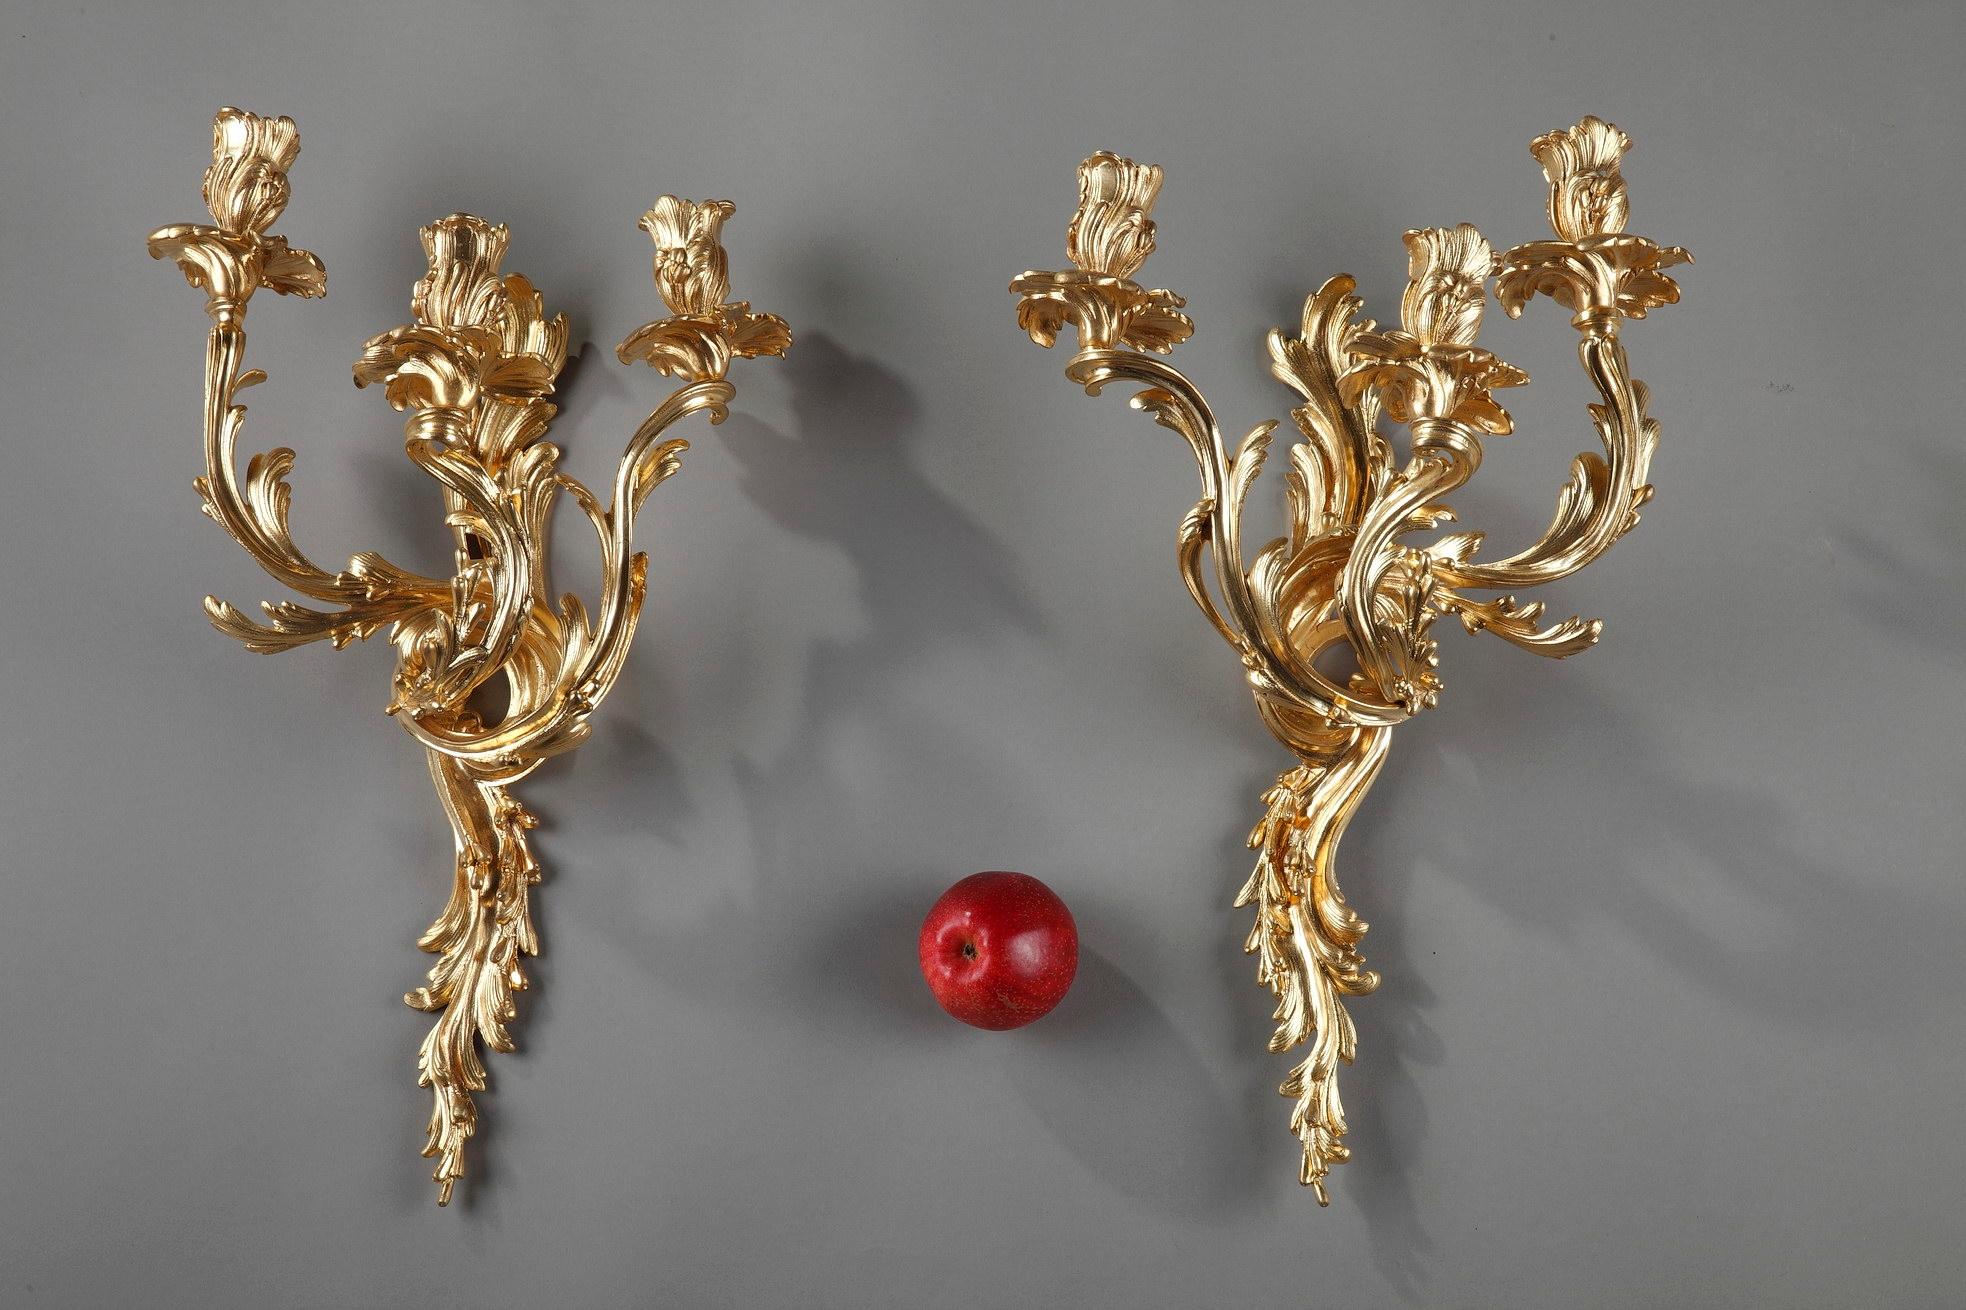 Pair of Rocaille sconces crafted in gilt and chiseled bronze with three-light. Richly decorated with flowing and asymmetrical foliage, these wall lights are a symphony of the Louis XV aesthetic, dominated by a plethora of realistic flowers, seeds